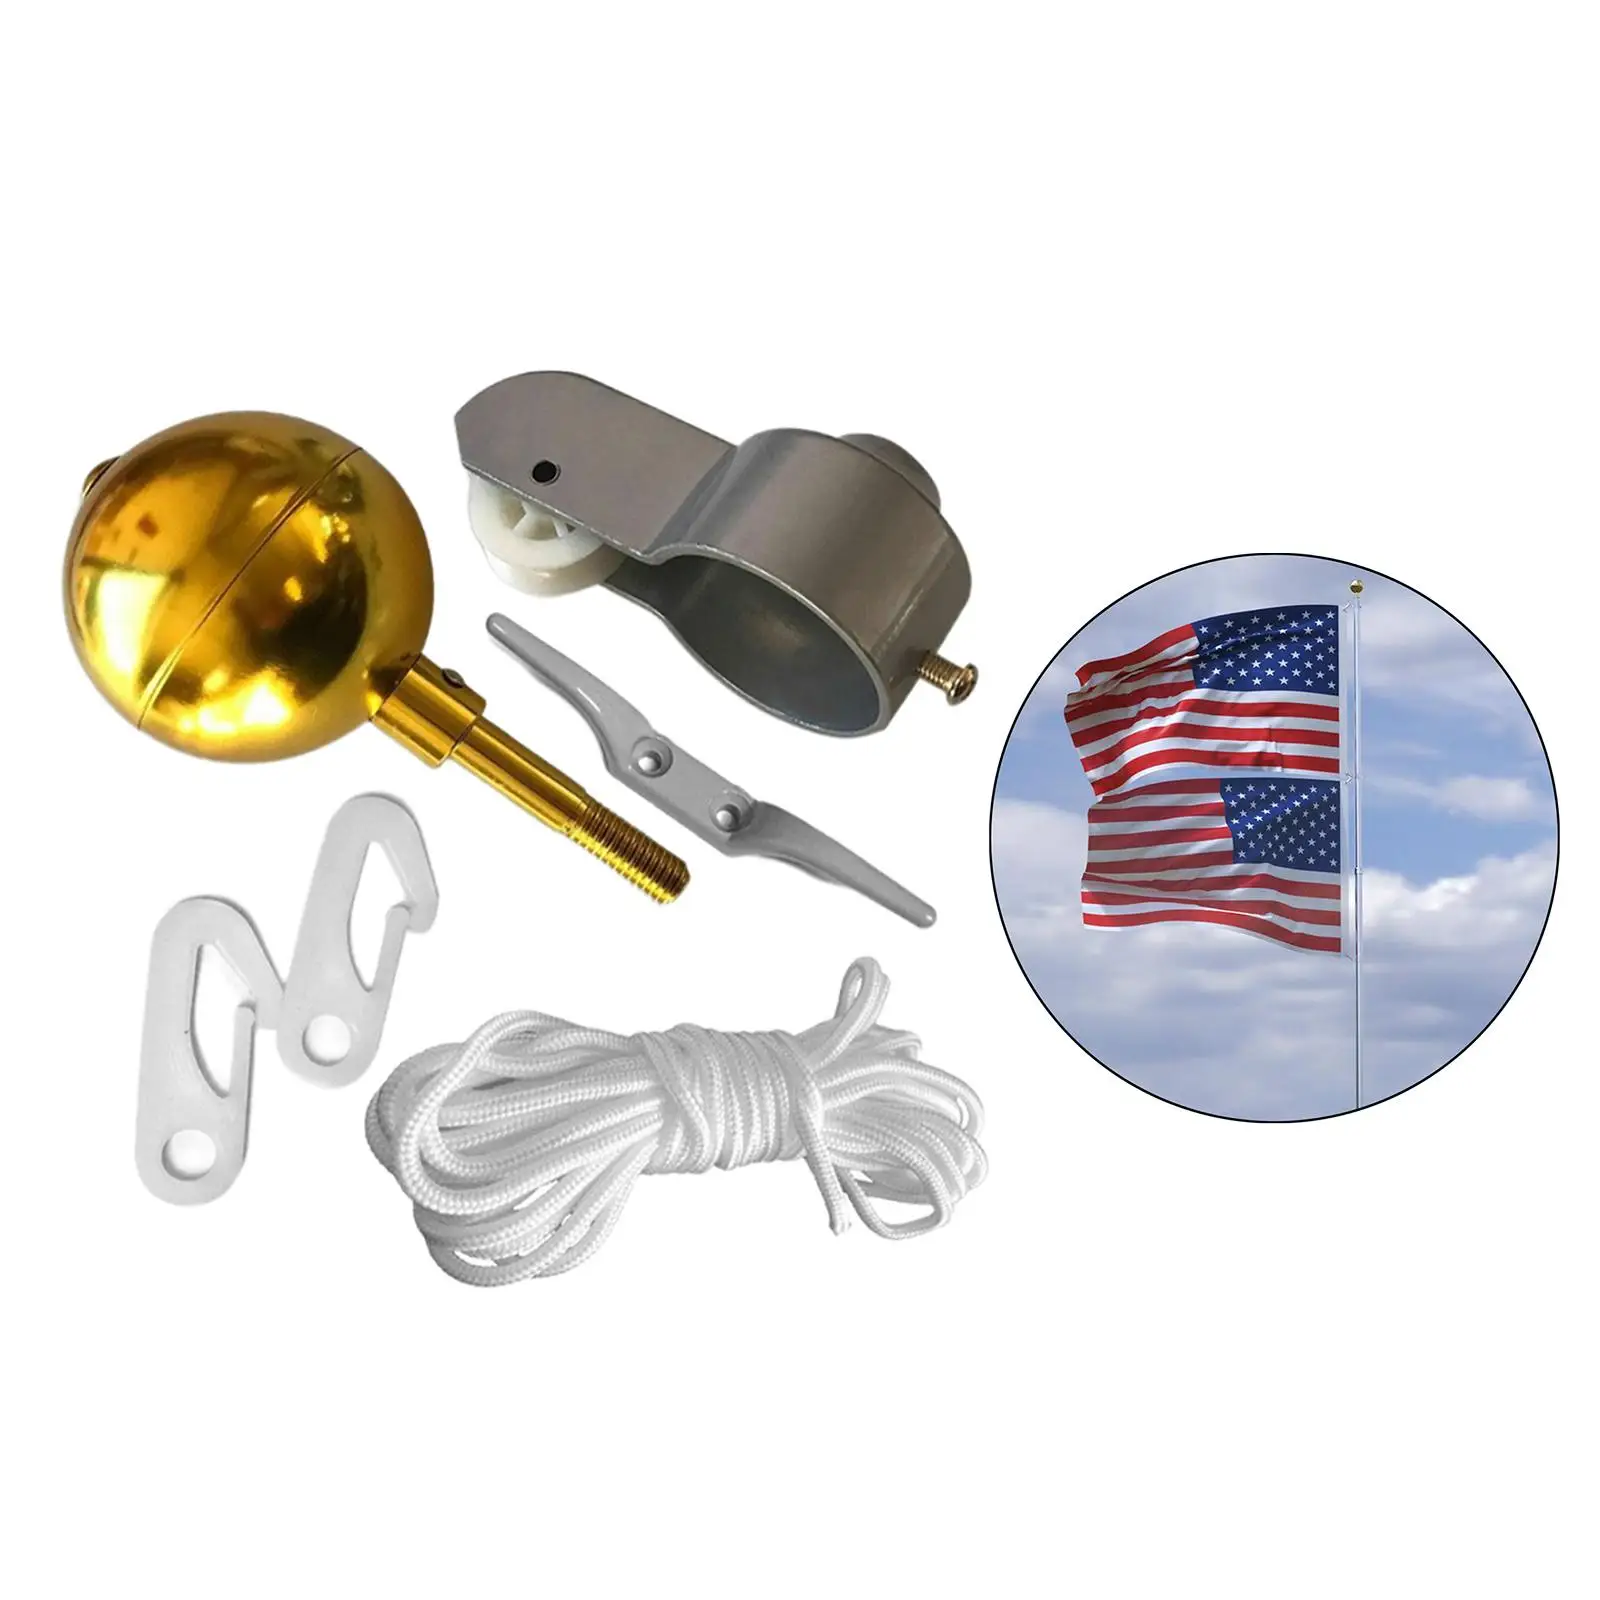 Flag Pole Hardware Parts Repair s Flagpole Hardware Accessory for 2